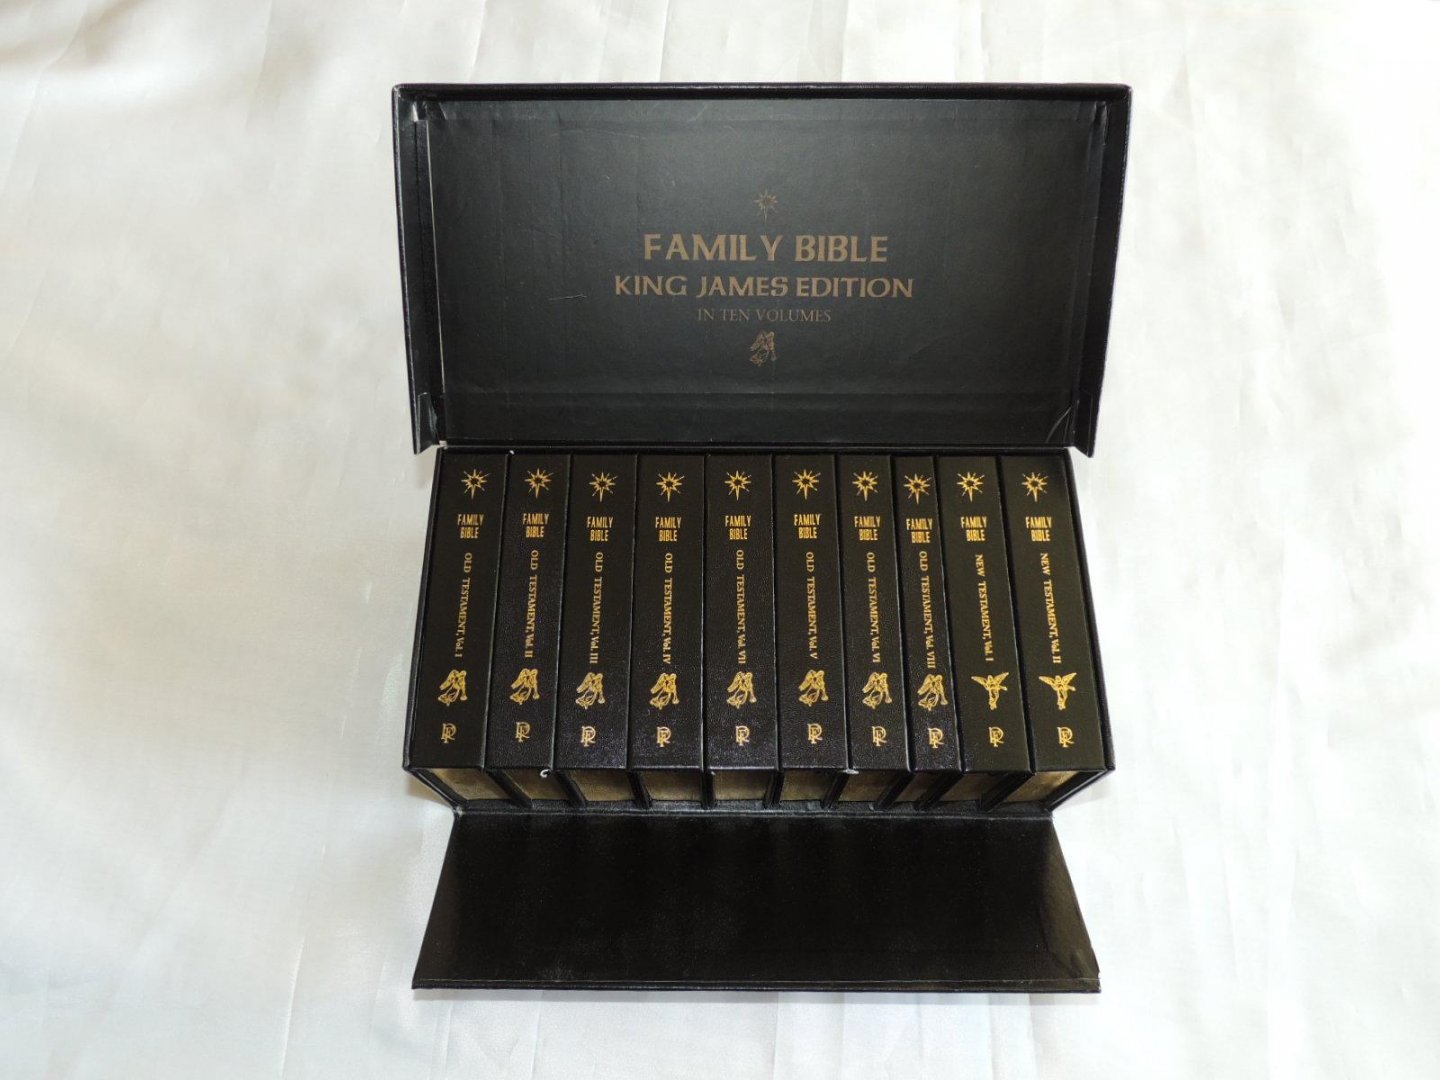  - Family Bible King James edition in ten volumes